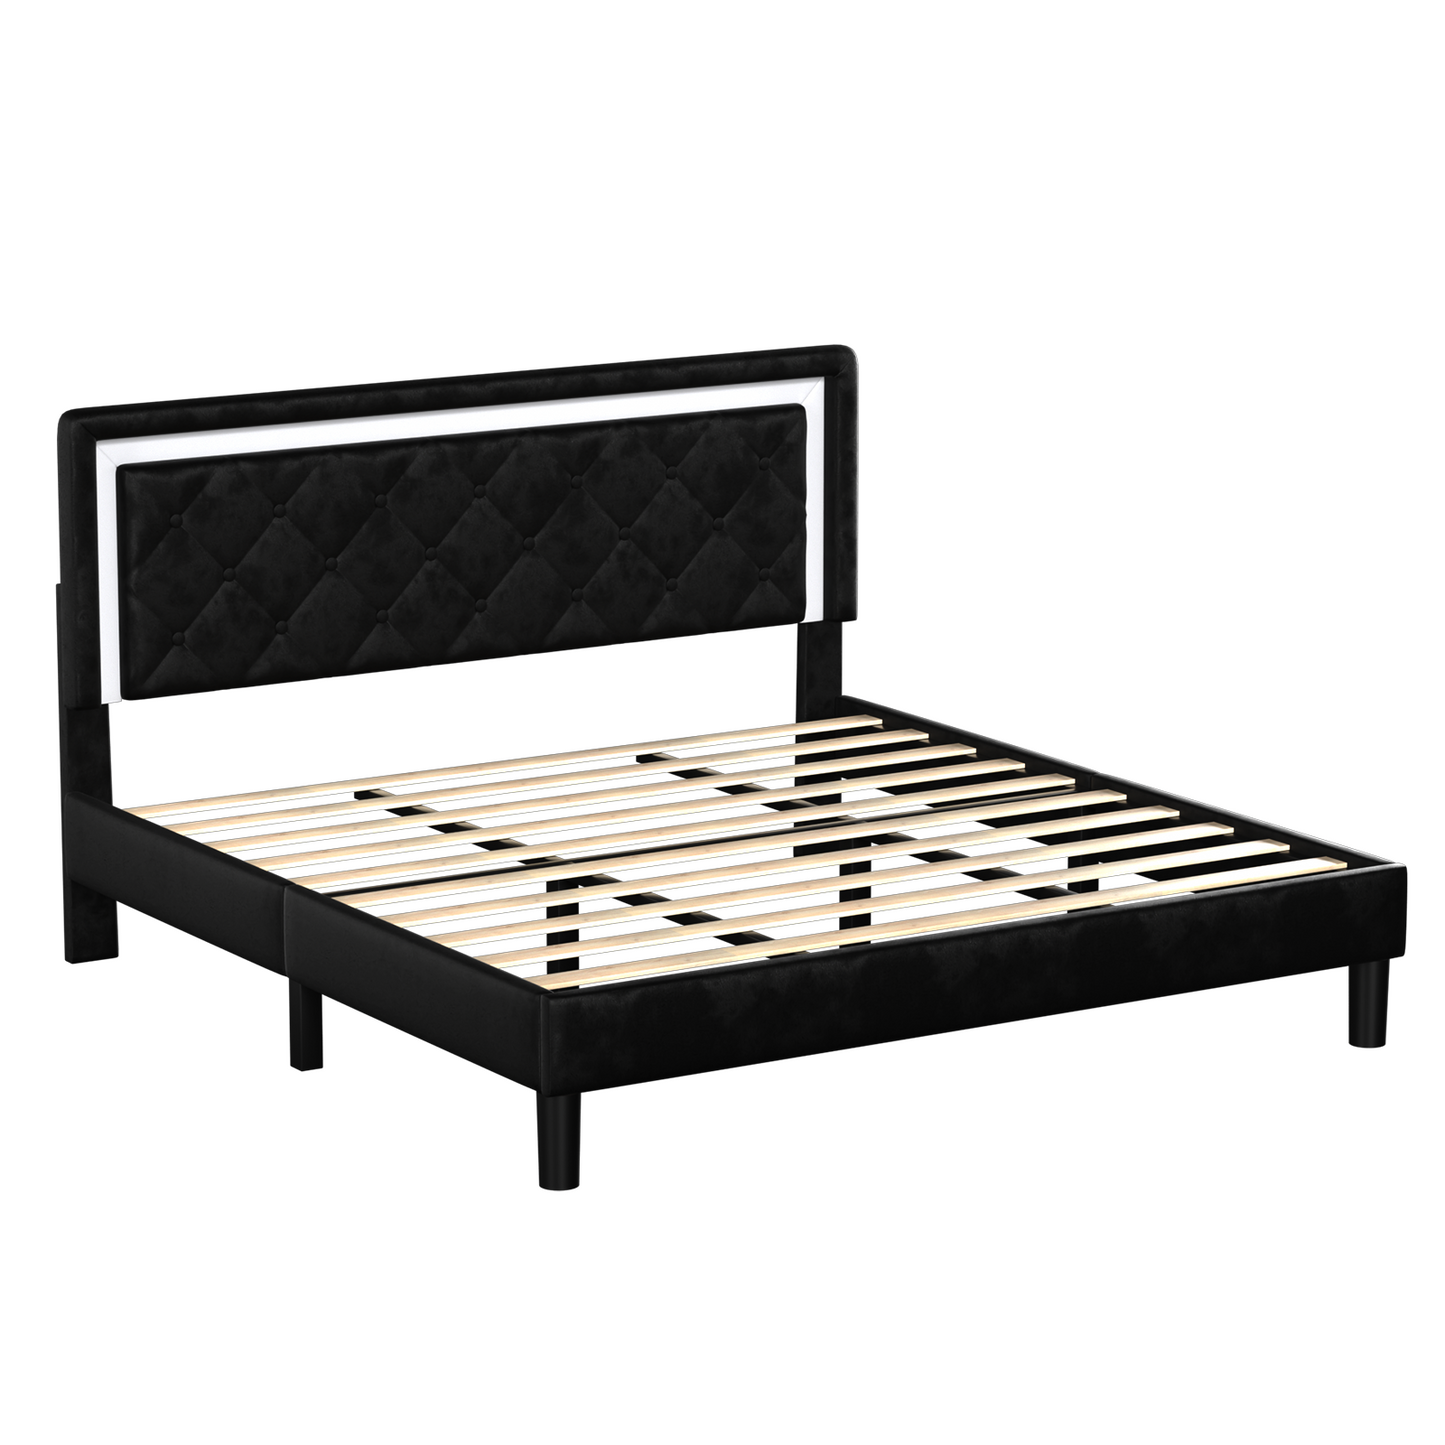 Molblly King Size Platform Bed Frame with Upholstered Headboard, Strong Frame, and Wooden Slats Support, Non-Slip, and Noise-Free, No Box Spring Needed, Easy Assembly, black